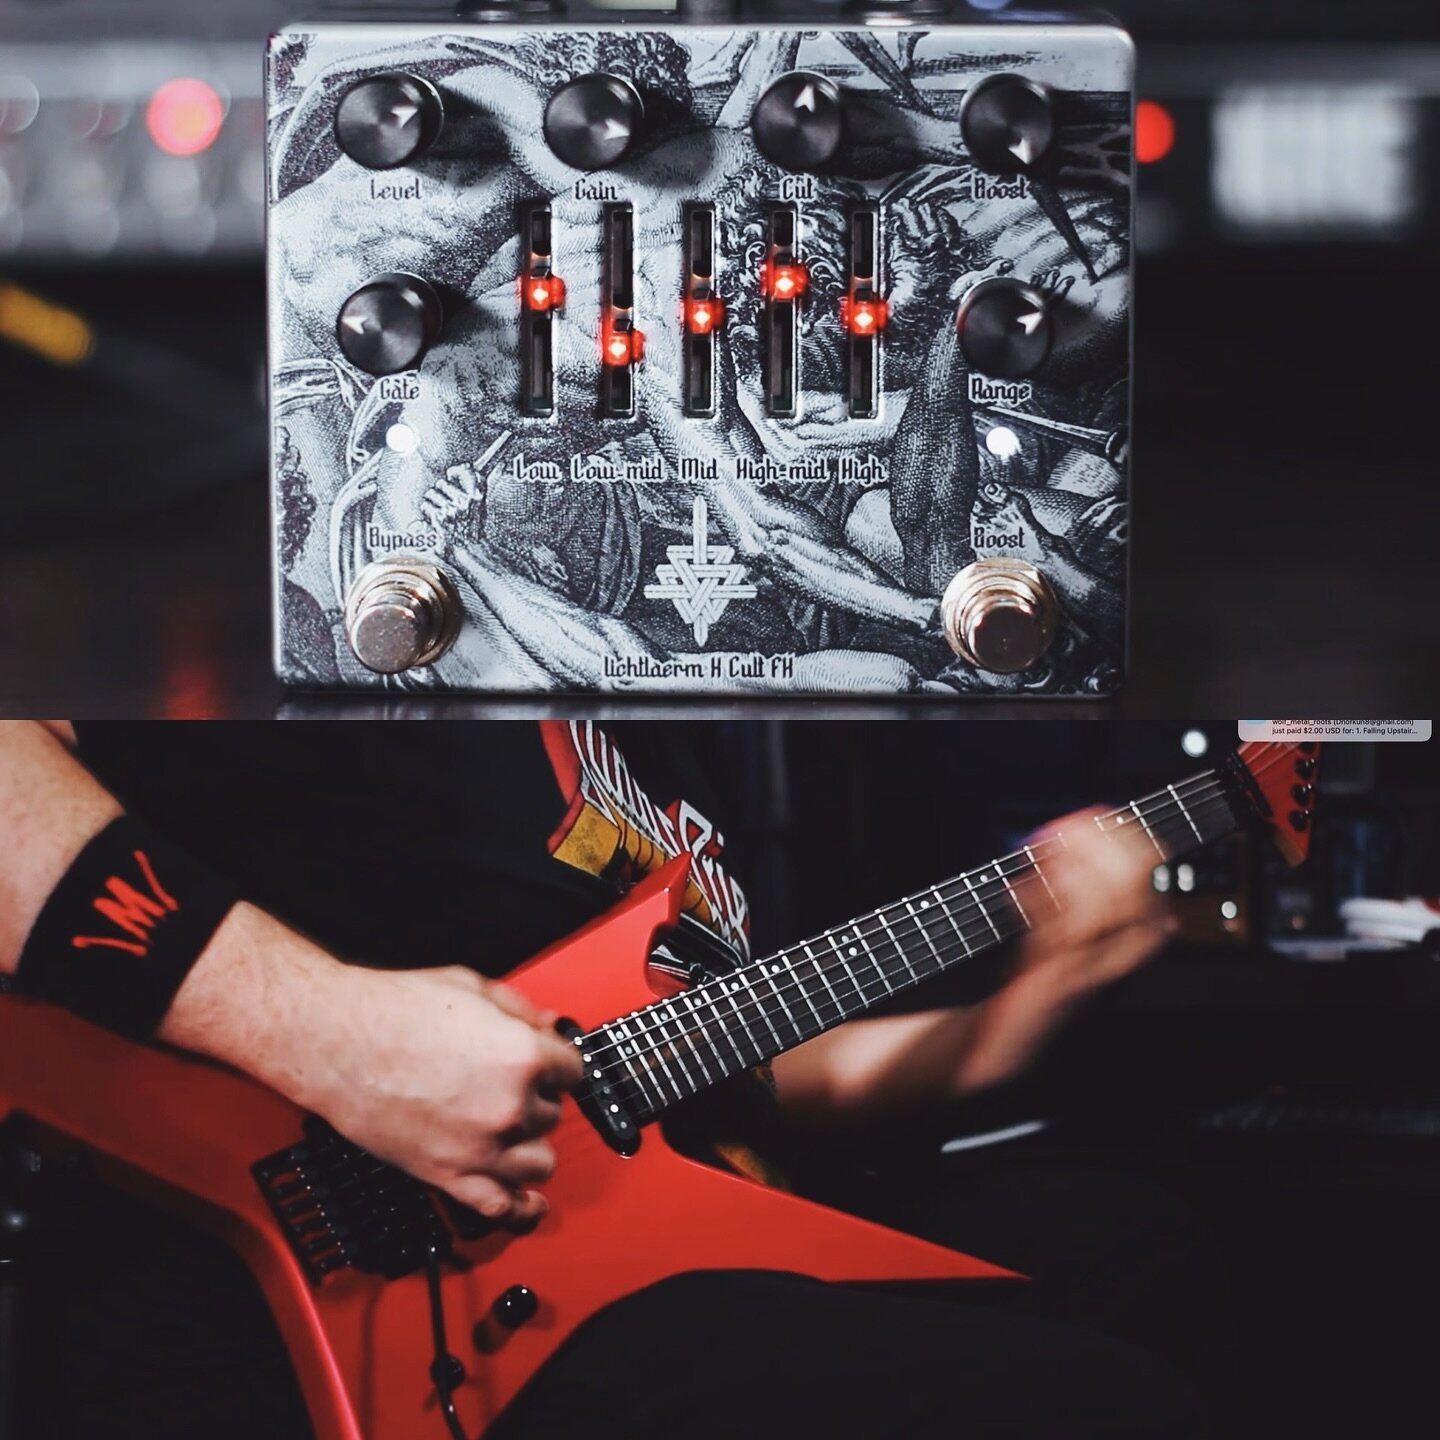 &quot;This is one of the best distortion pedals I've ever tried...&quot;

Thanks, @metalheadproductions! Check the TDW demo on his channel for some distortion worship of the highest order and the stunning RIP Star Destroyer, which led to some impulsi